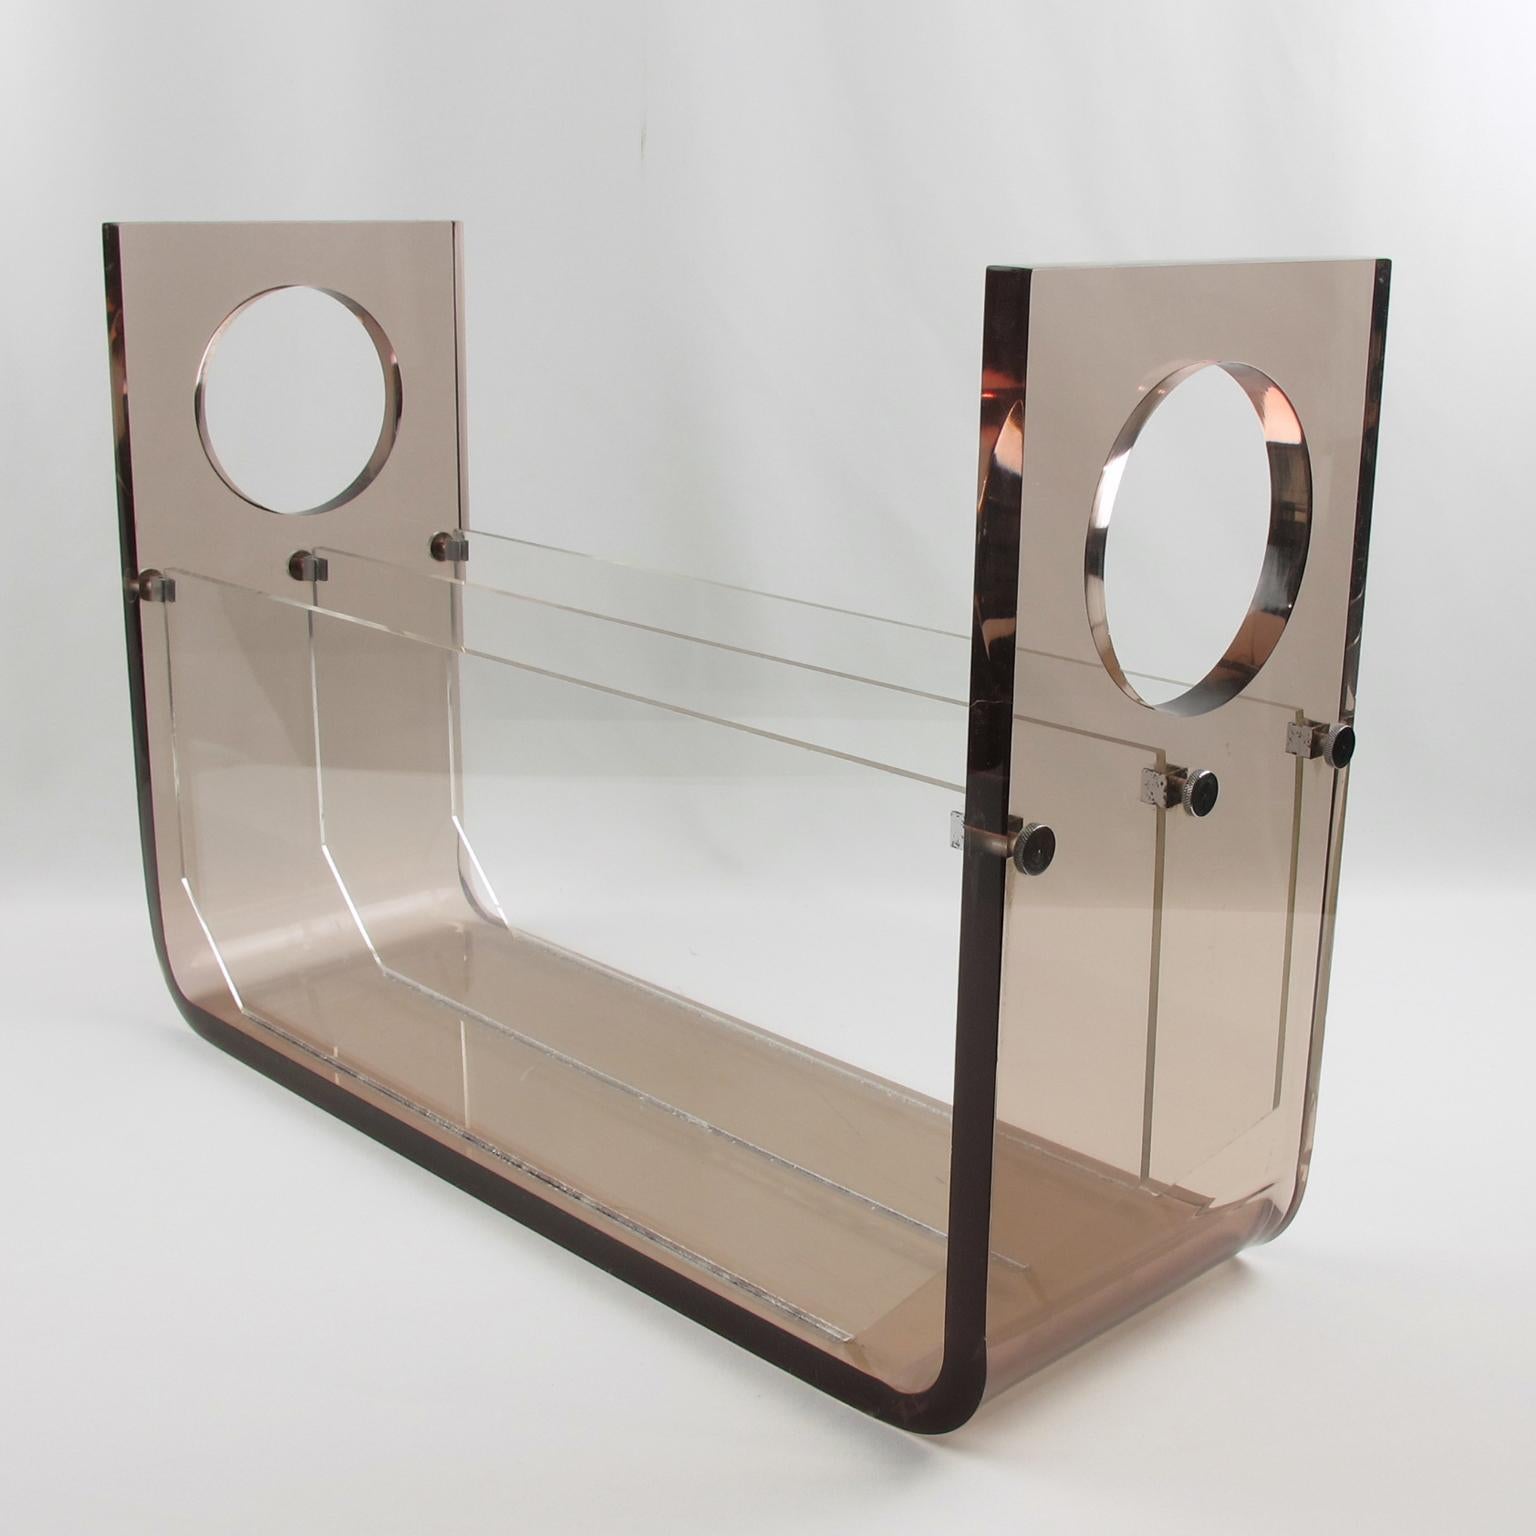 Stunning Lucite or acrylic magazine rack, stand, or holder designed for Roche Bobois, France. This high-quality thick plexiglass construction is reminiscent of work by designer Michel Ducaroy or Michel Dumas. Extra thick smoke gray transparent